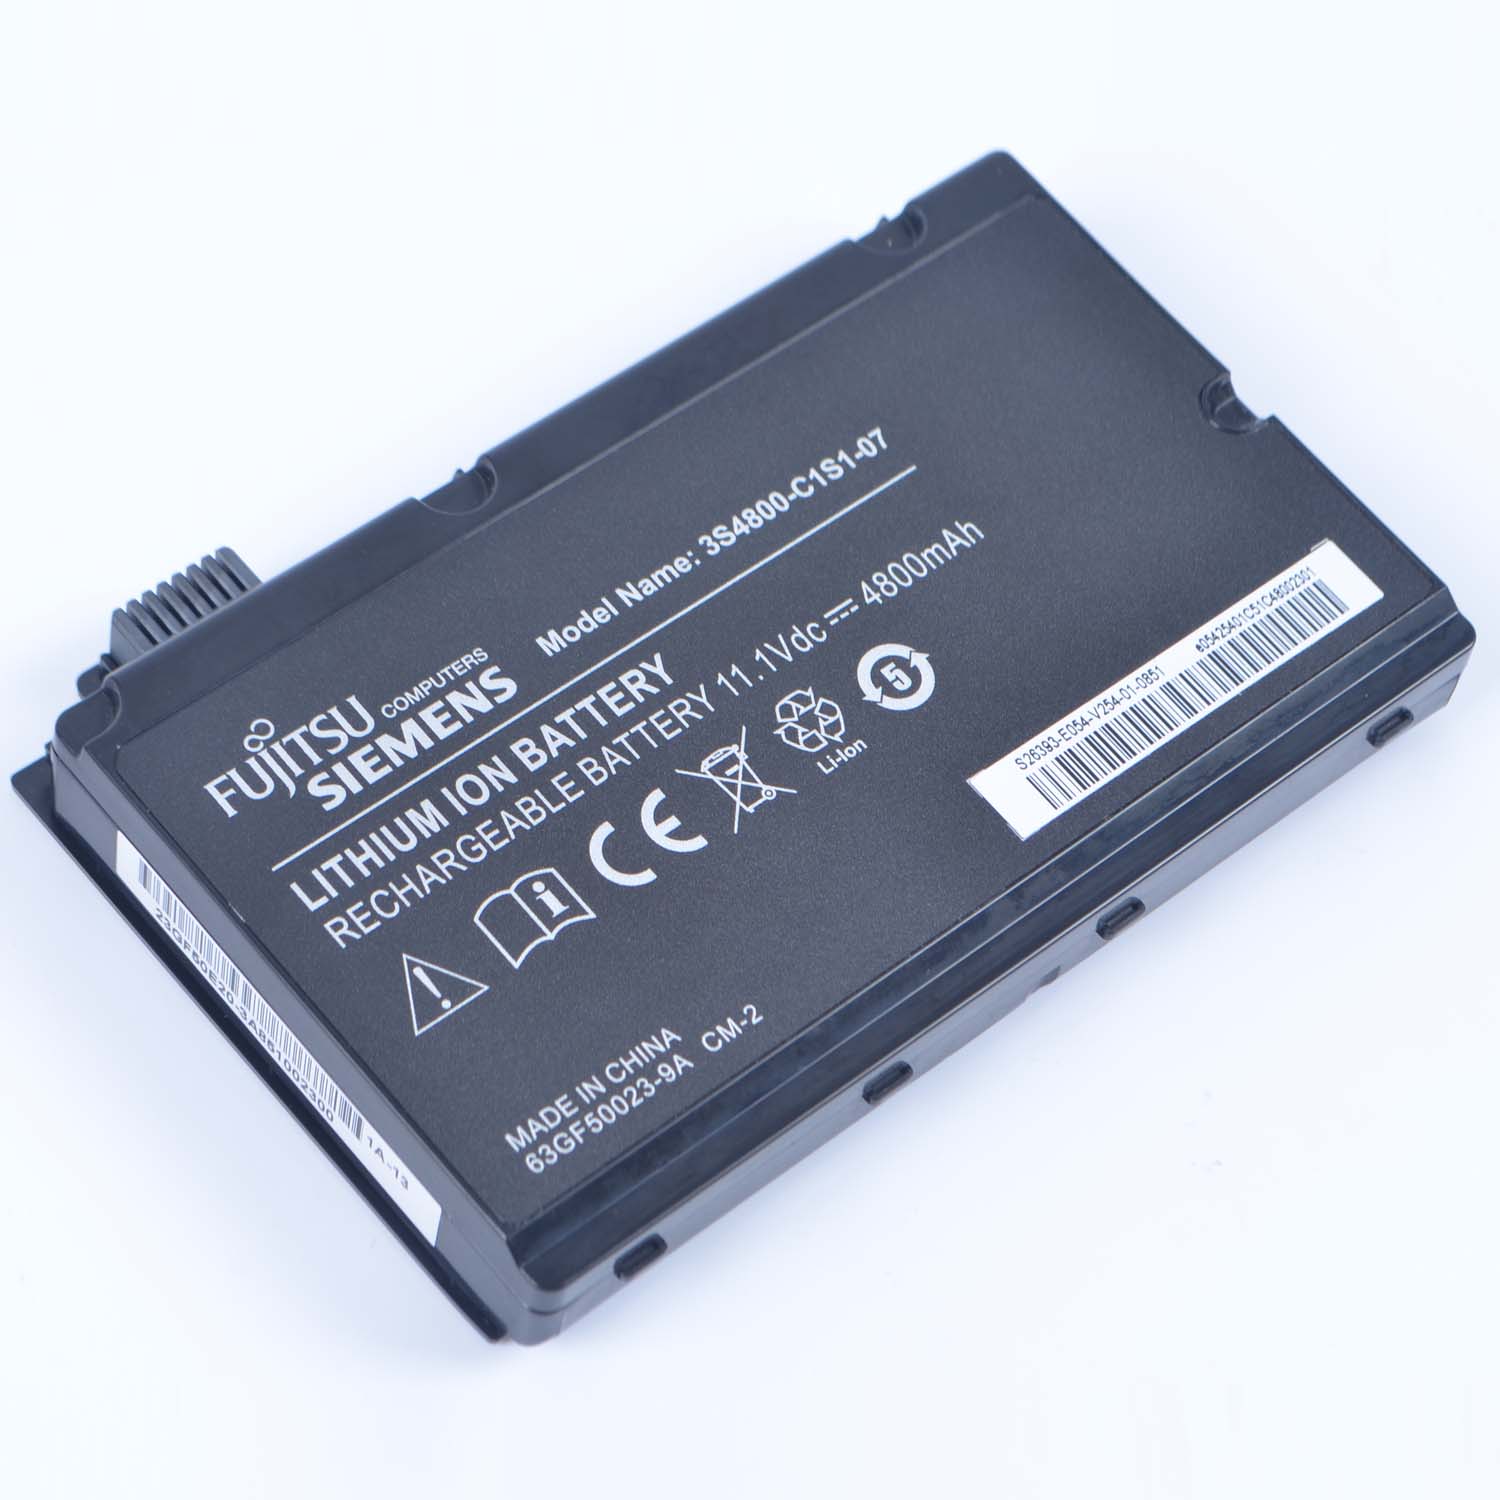 Replacement Battery for FUJITSU P55-3S4400-S1S5 battery